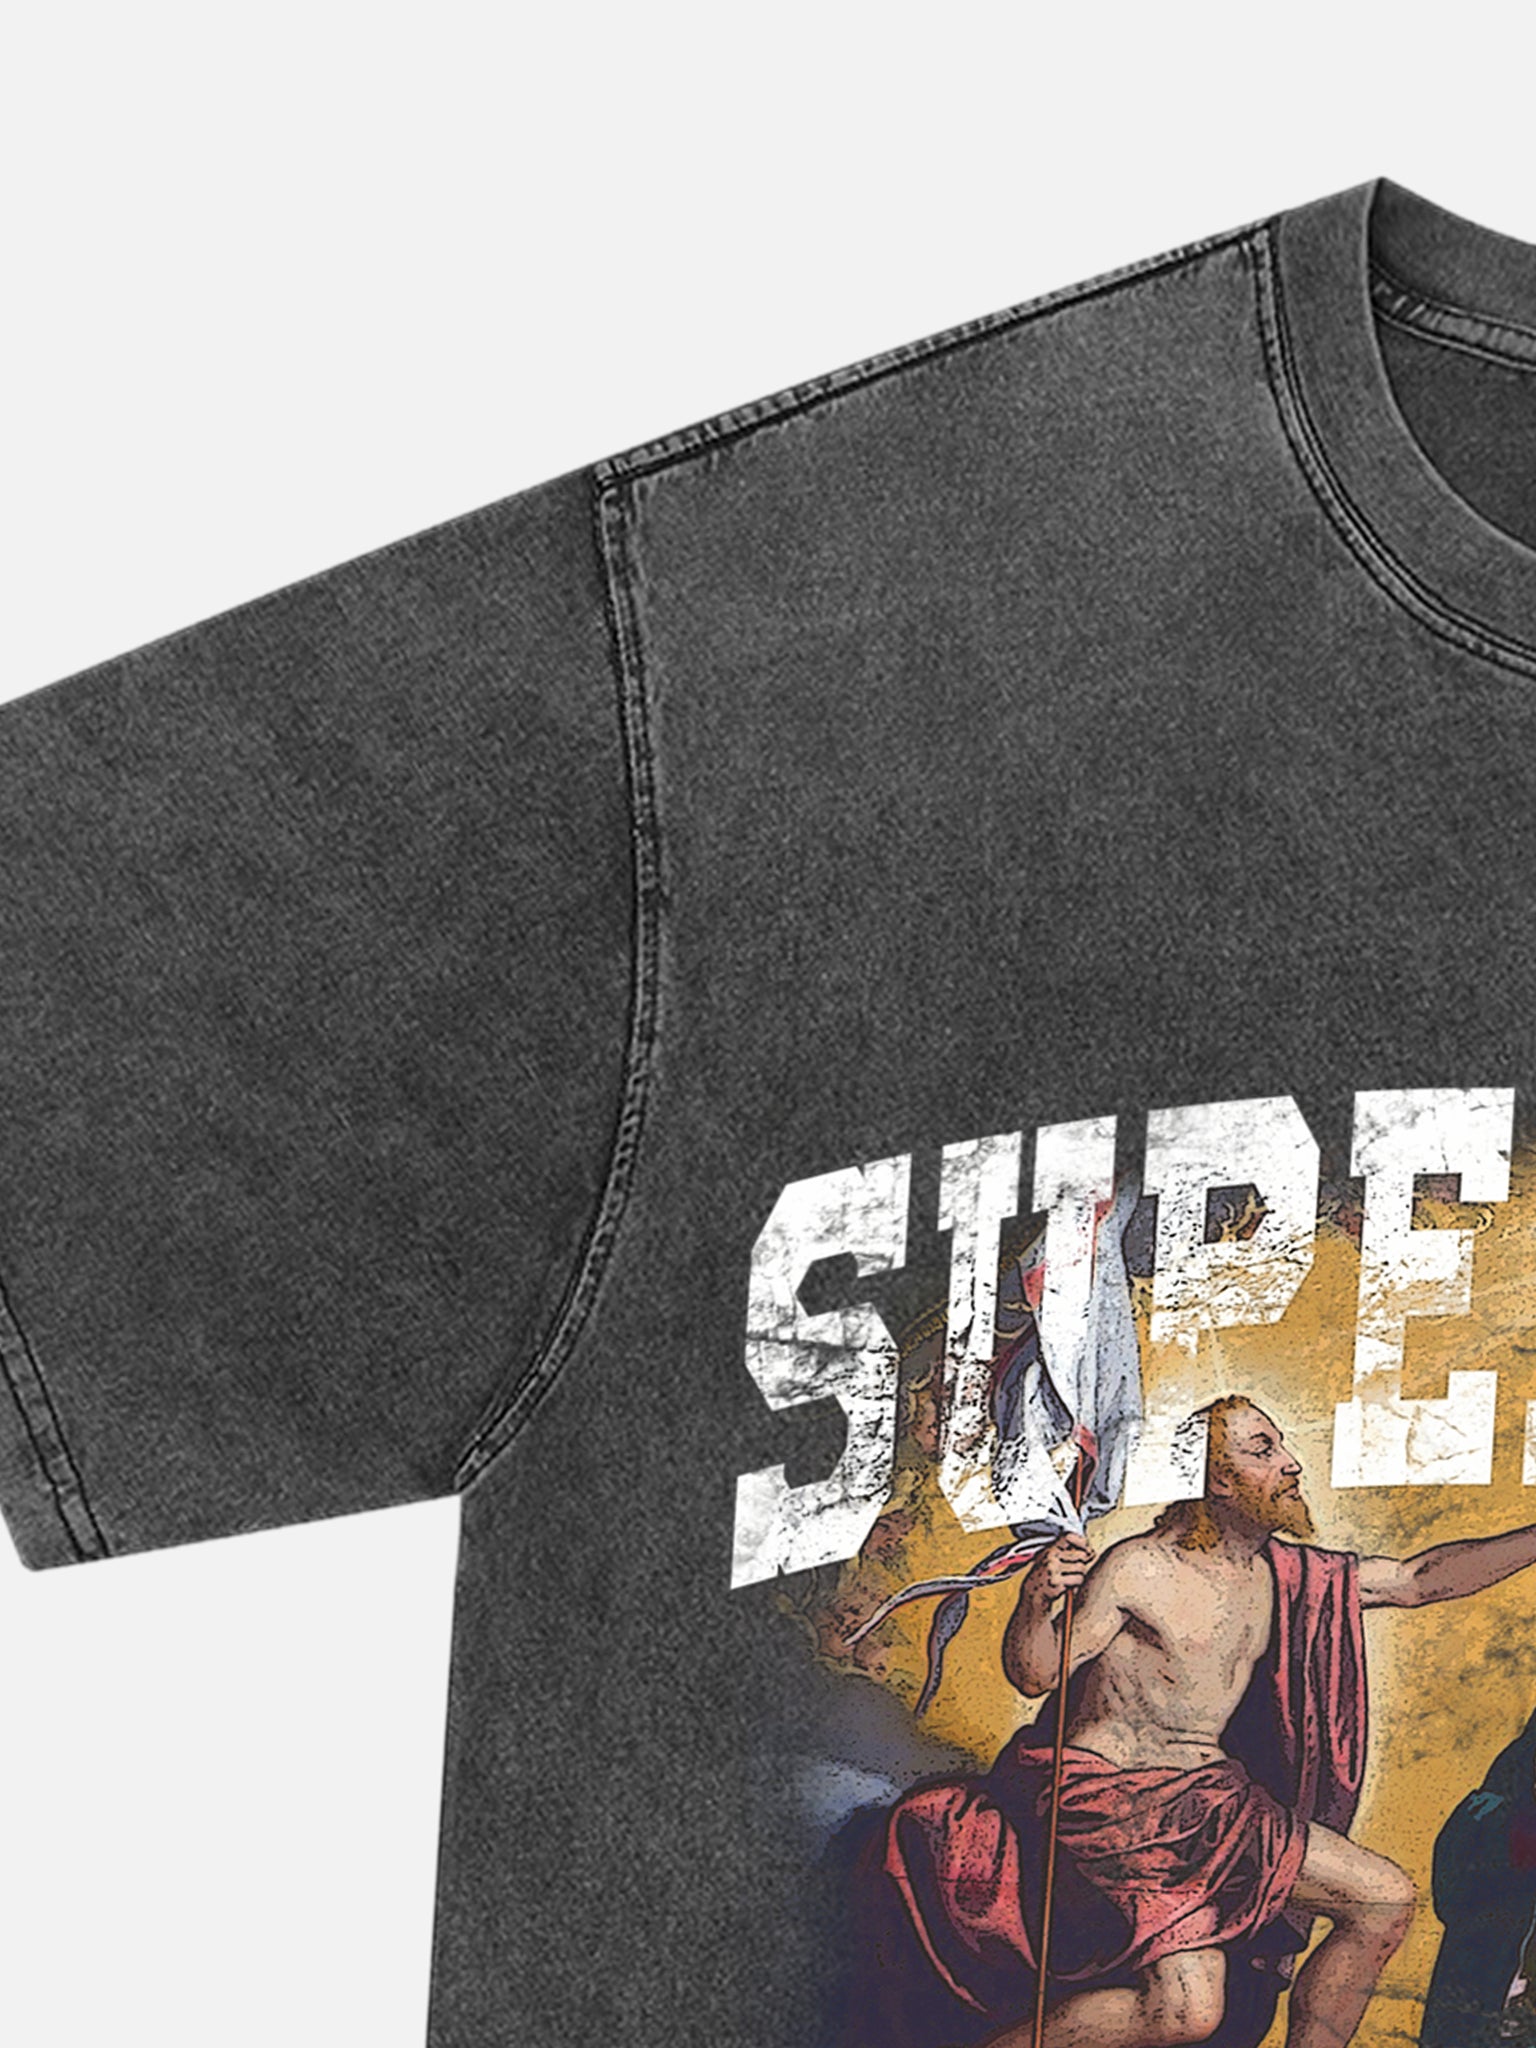 Thesupermade Renaissance Washed Distressed Hip Hop T-shirt